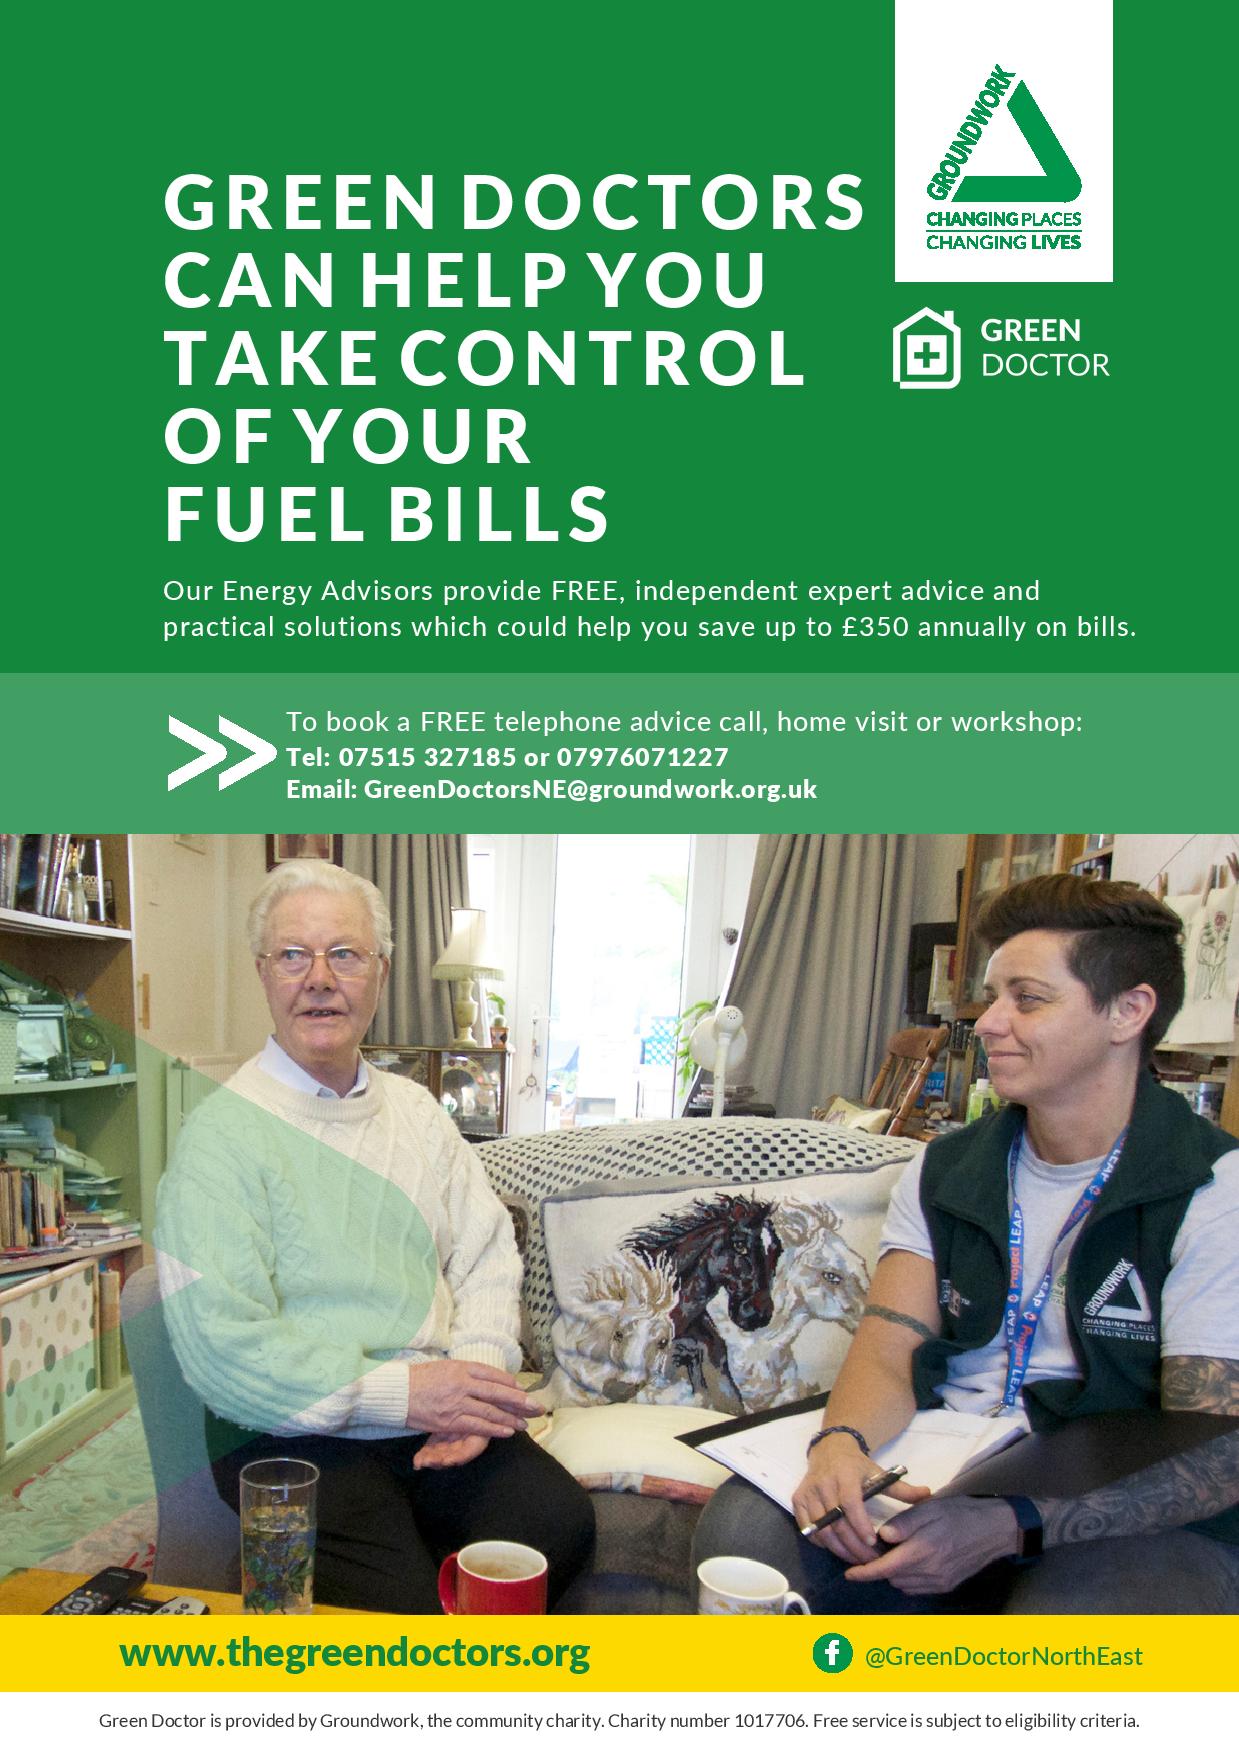 Groundwork NE Green Doctors can help you take control of fuel bills